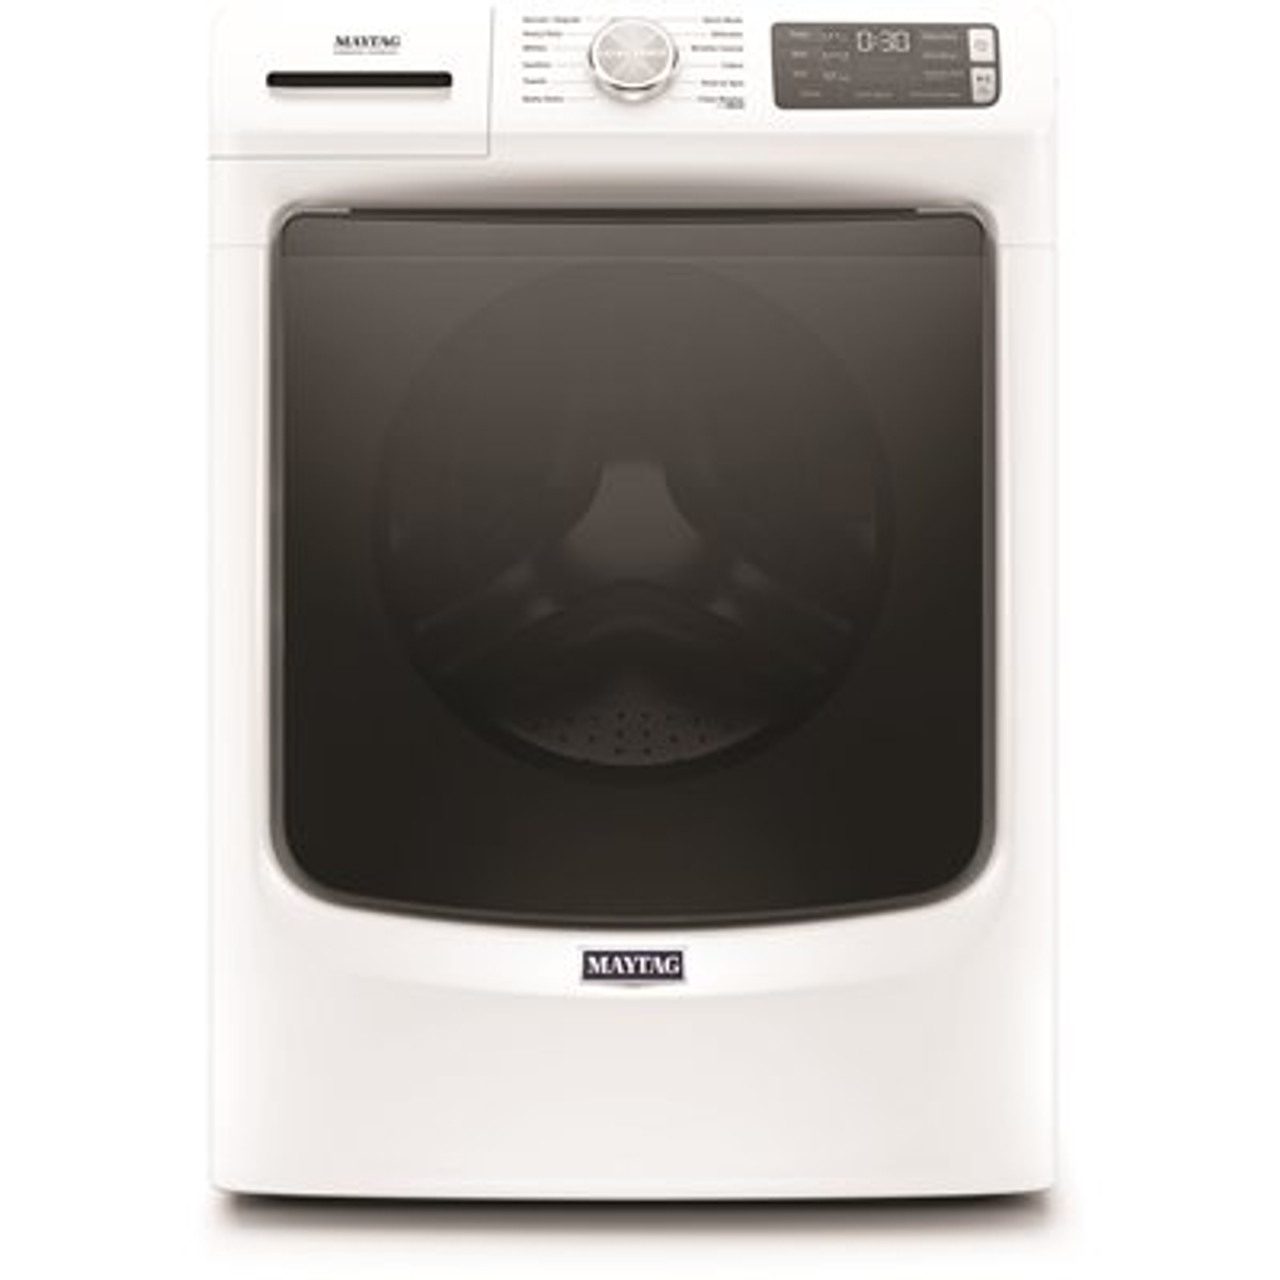 Maytag 4.8 cu. ft. Stackable White Front Load Washing Machine with Steam and 16-Hour Fresh Hold Option, ENERGY STAR